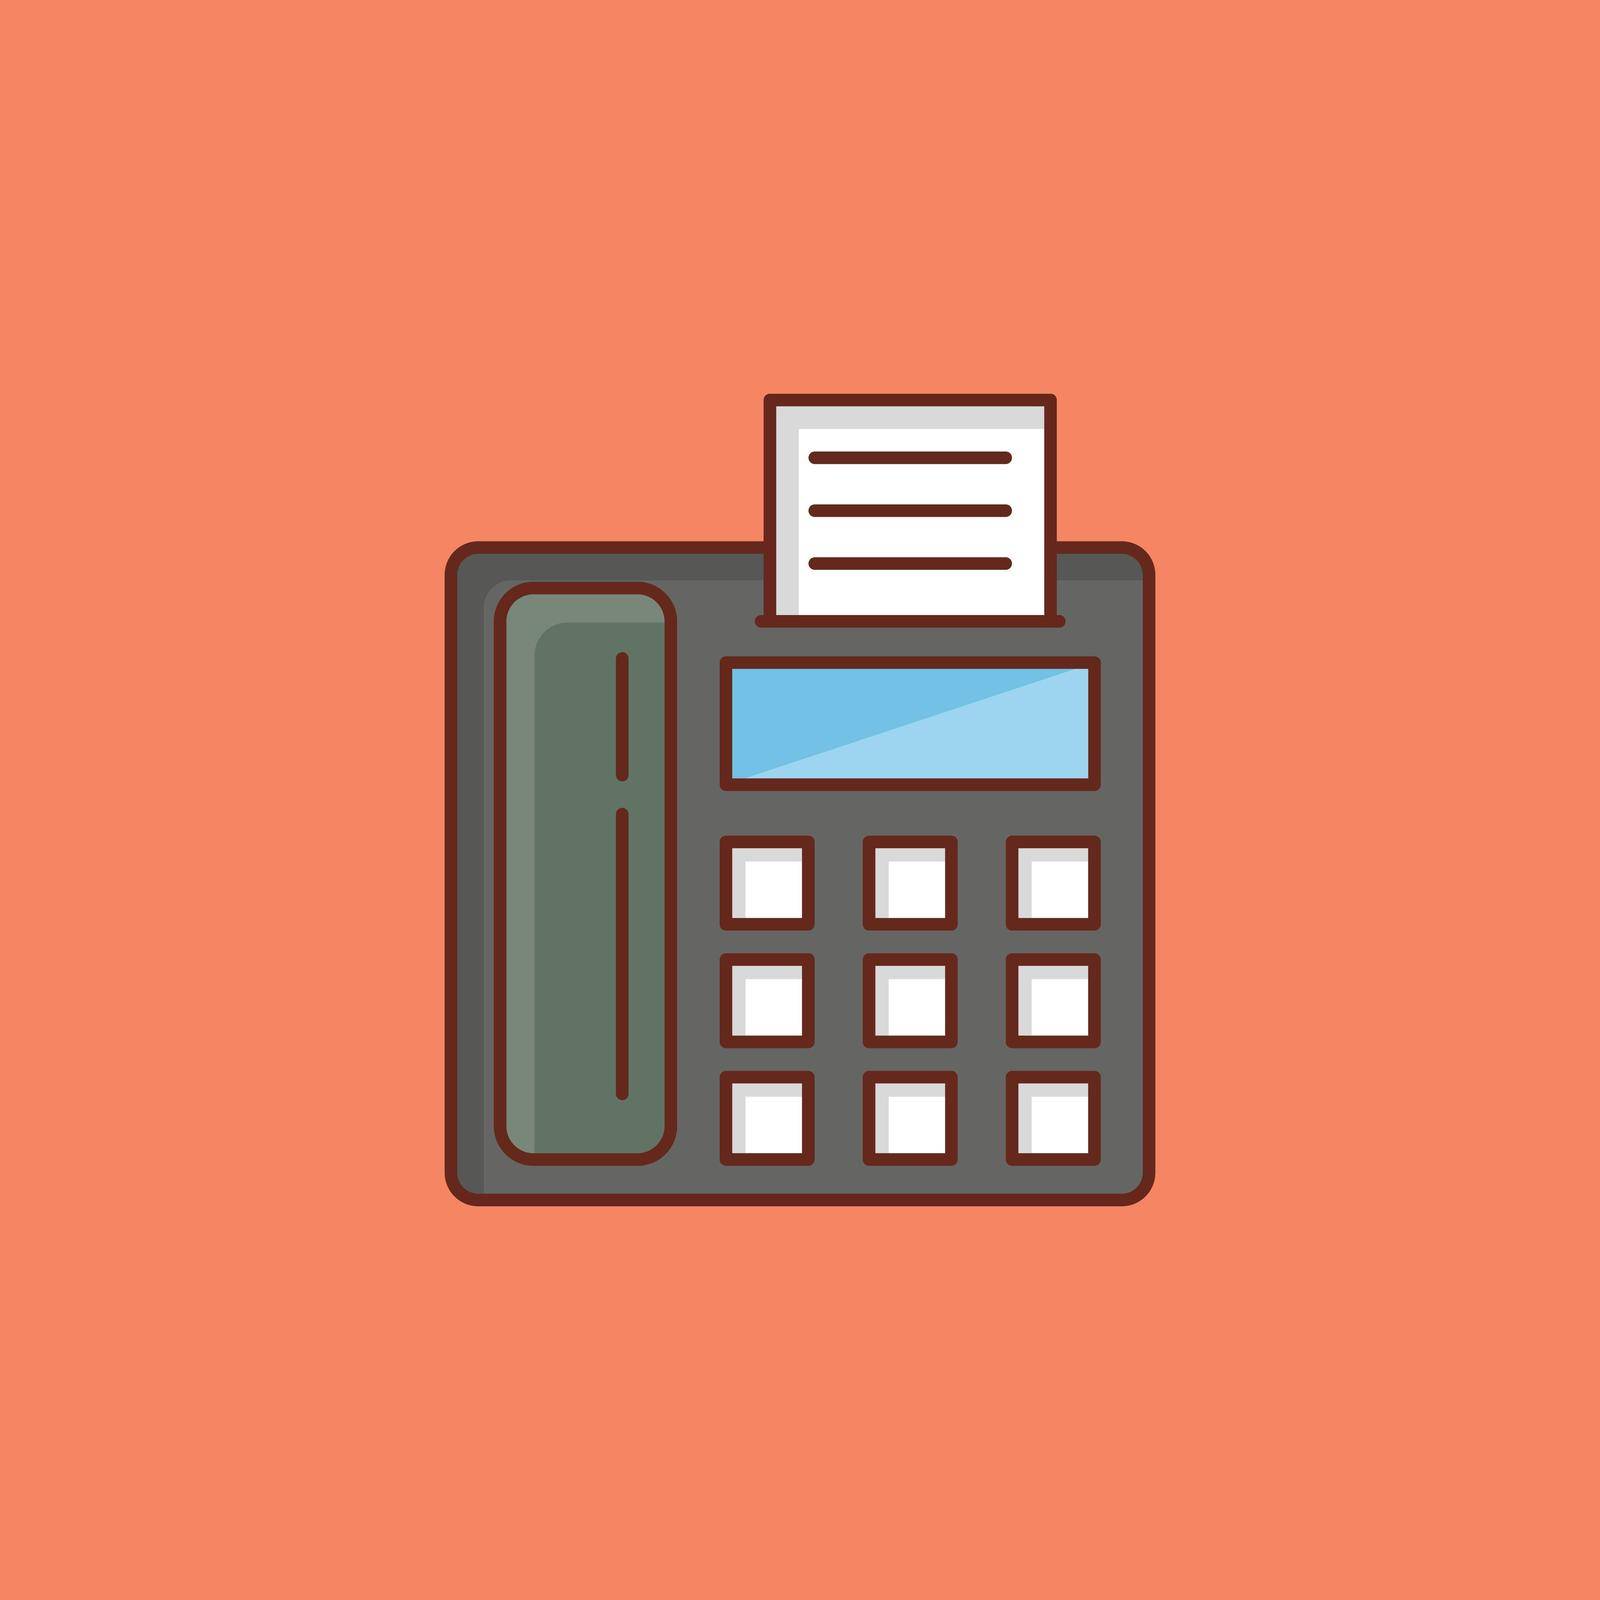 telephone Vector illustration on a transparent background. Premium quality symbols. Vector Line Flat color icon for concept and graphic design.